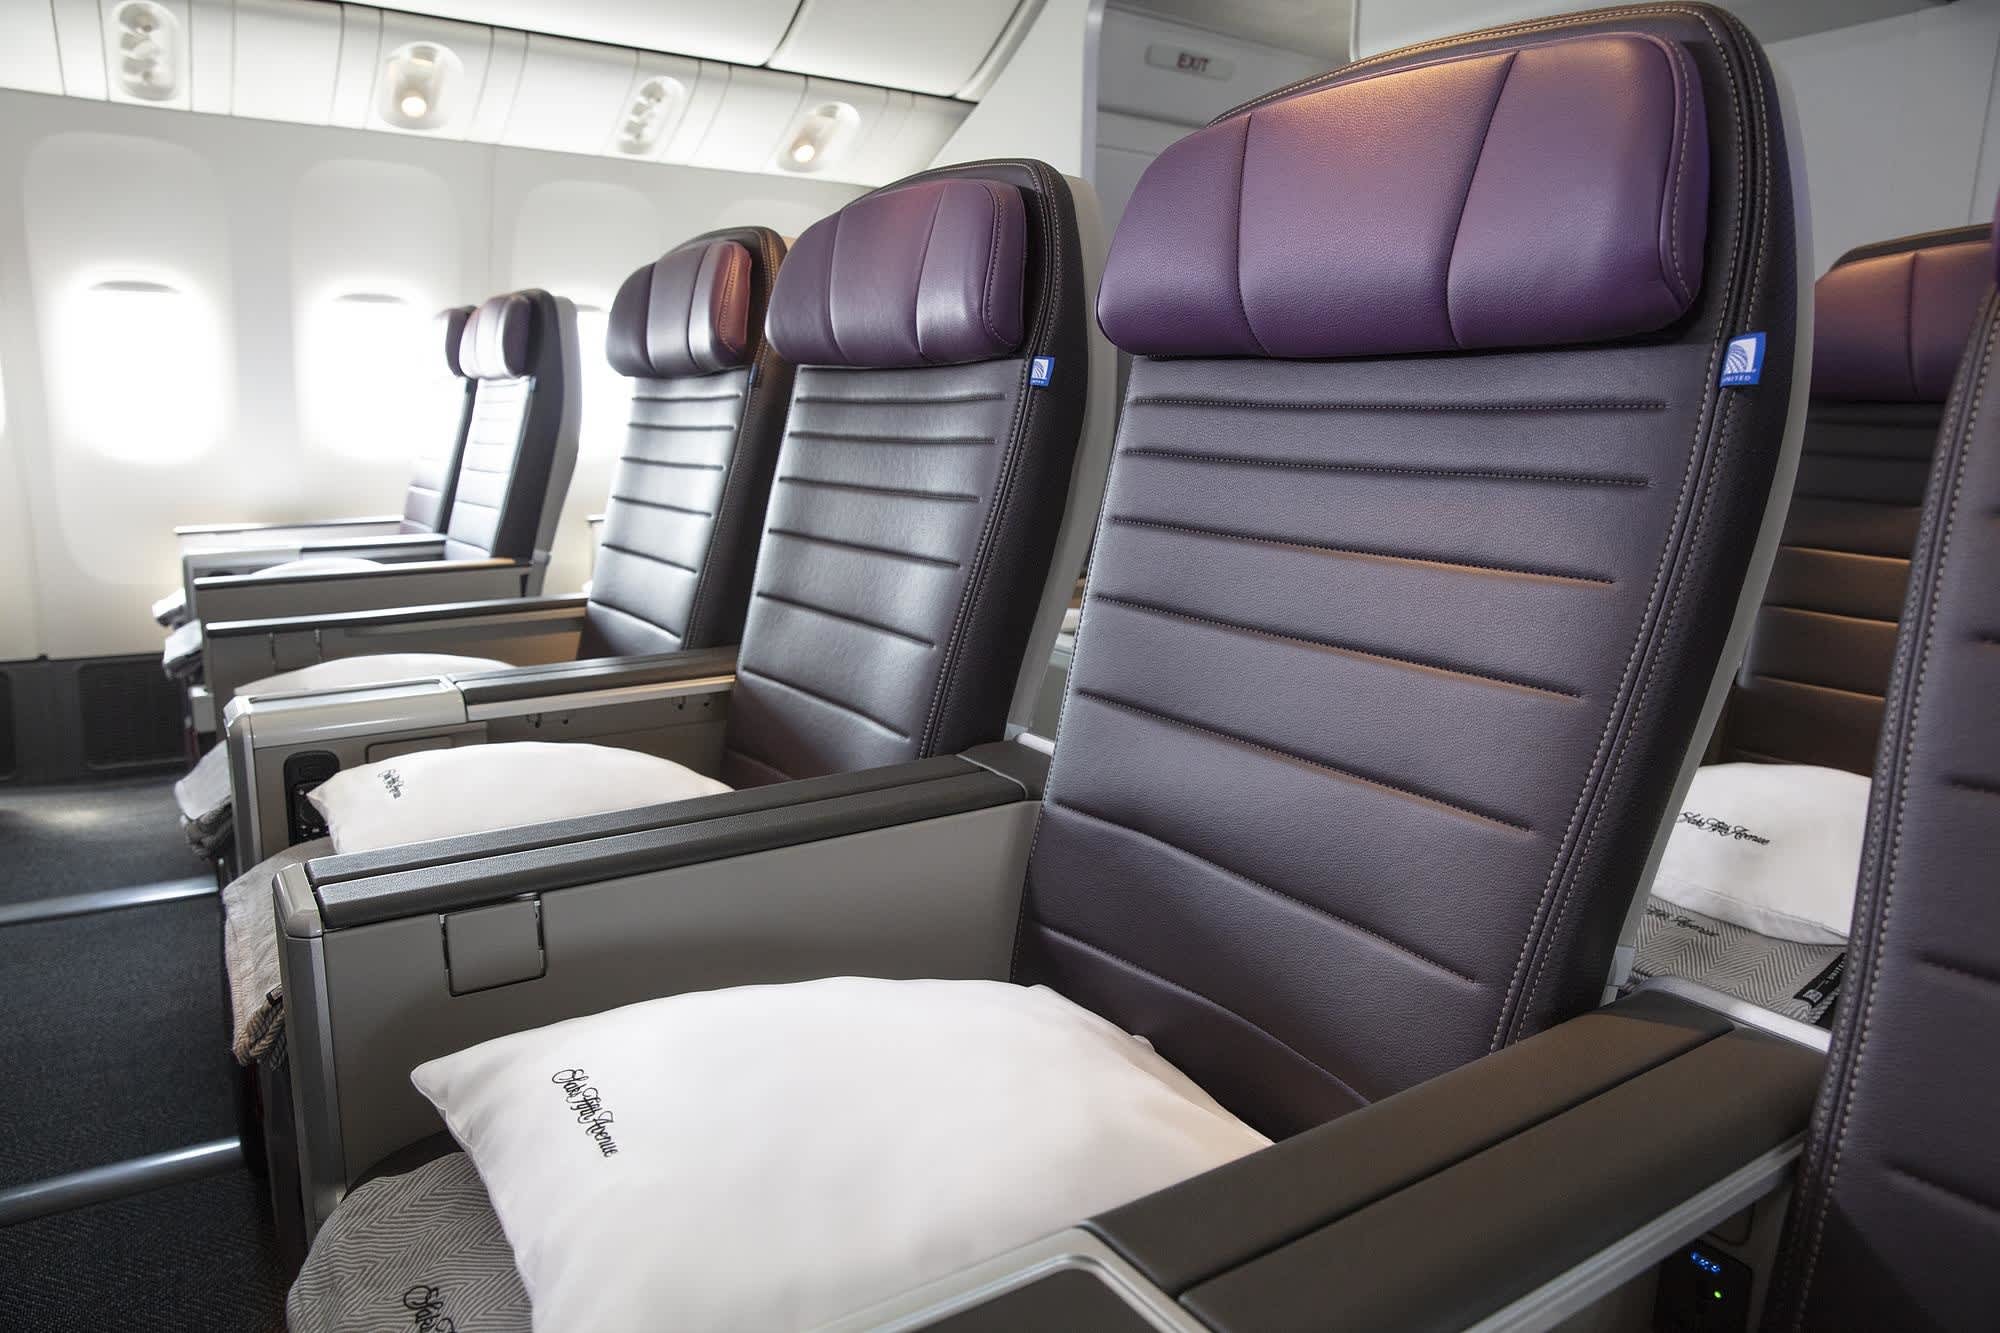 Does United Airlines Have Premium Economy Seats?